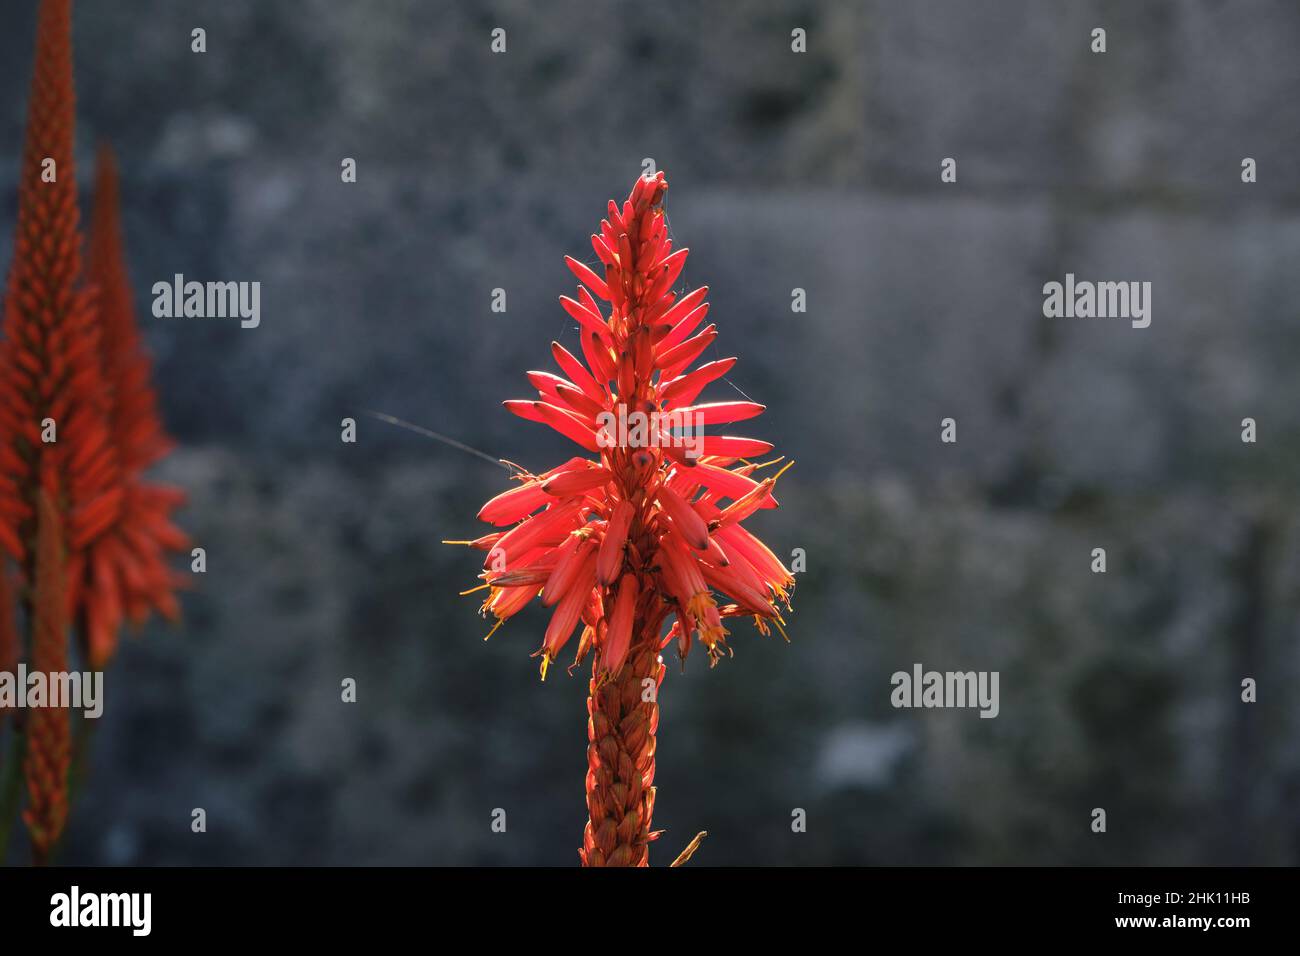 Aloe arborescens winter blooming succulent plant red flower Stock Photo